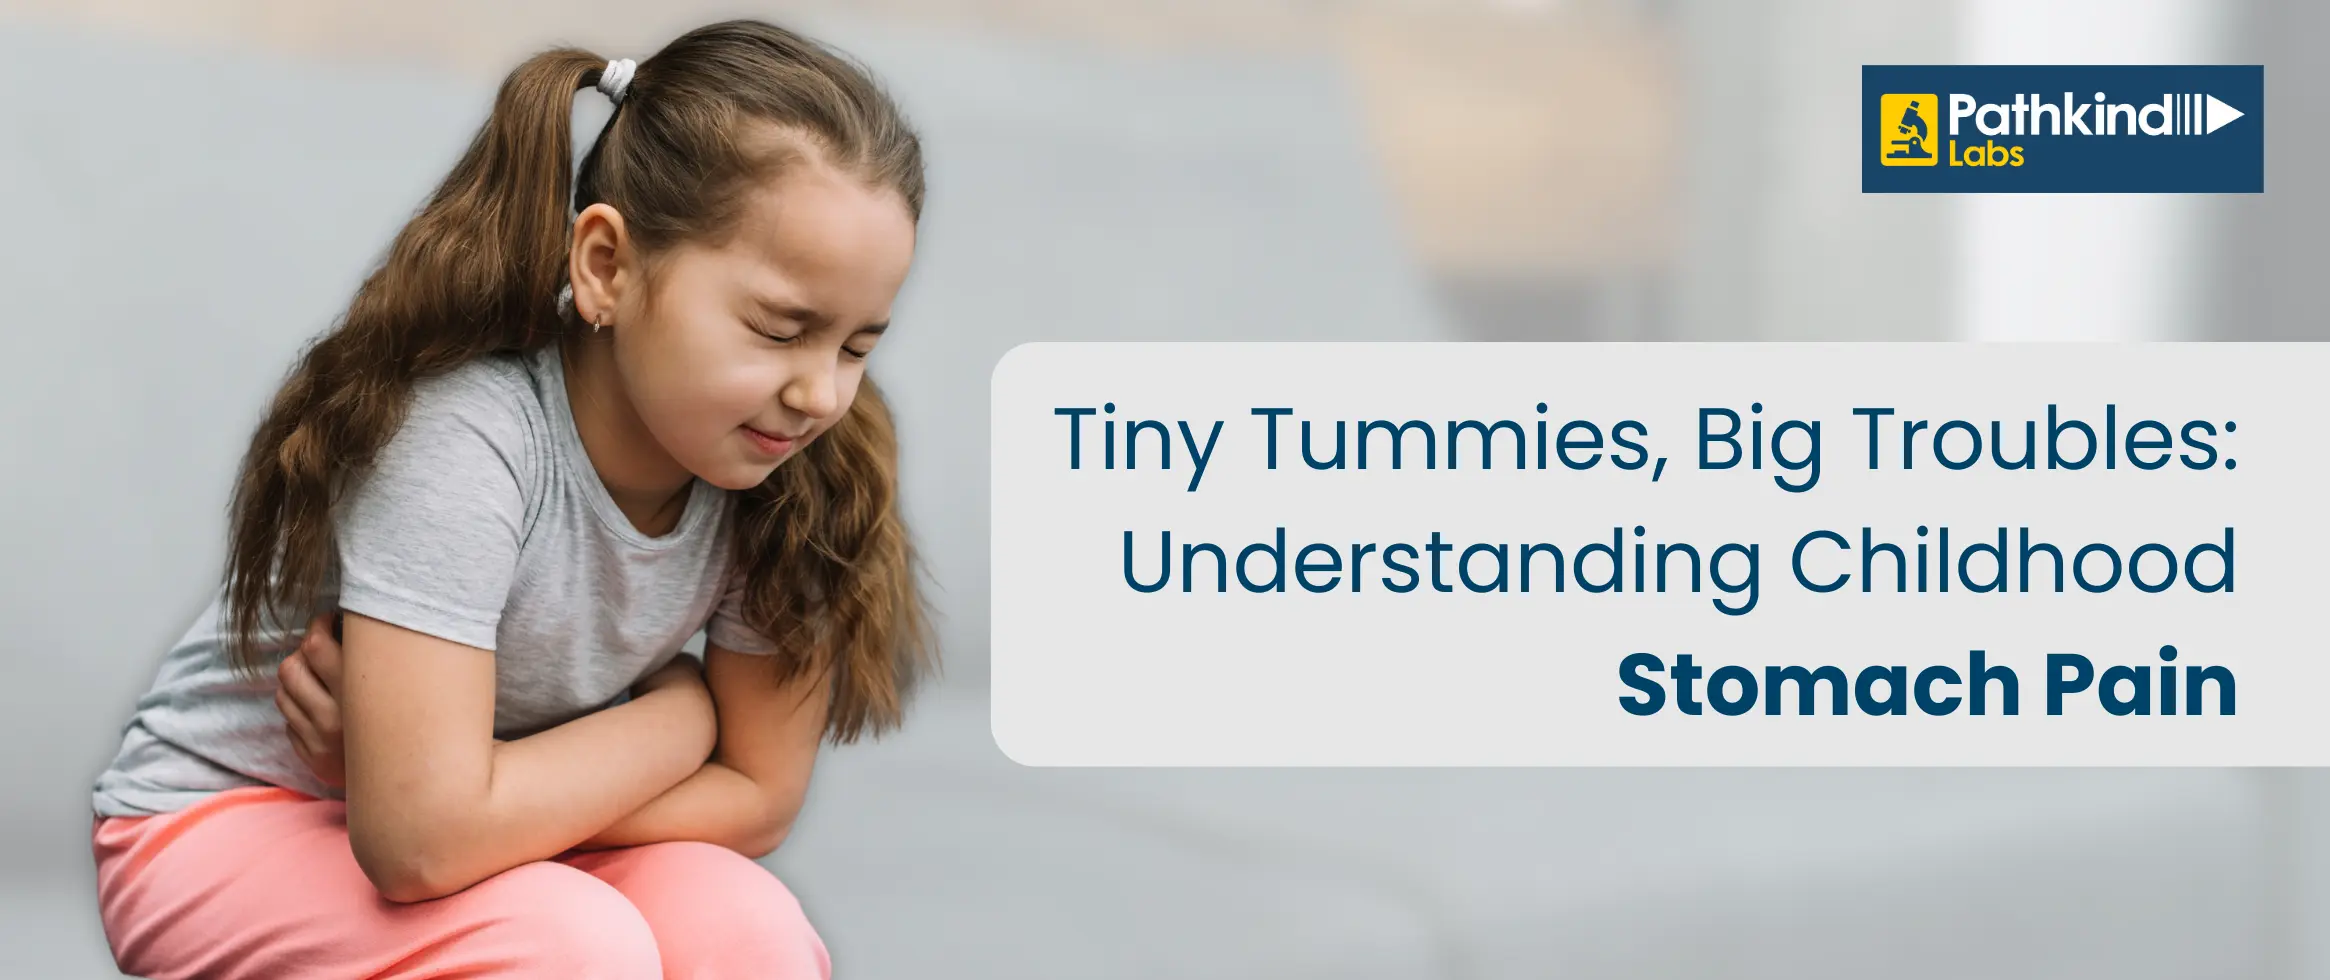  Tiny Tummies, Big Troubles: Understanding Childhood Stomach Pain